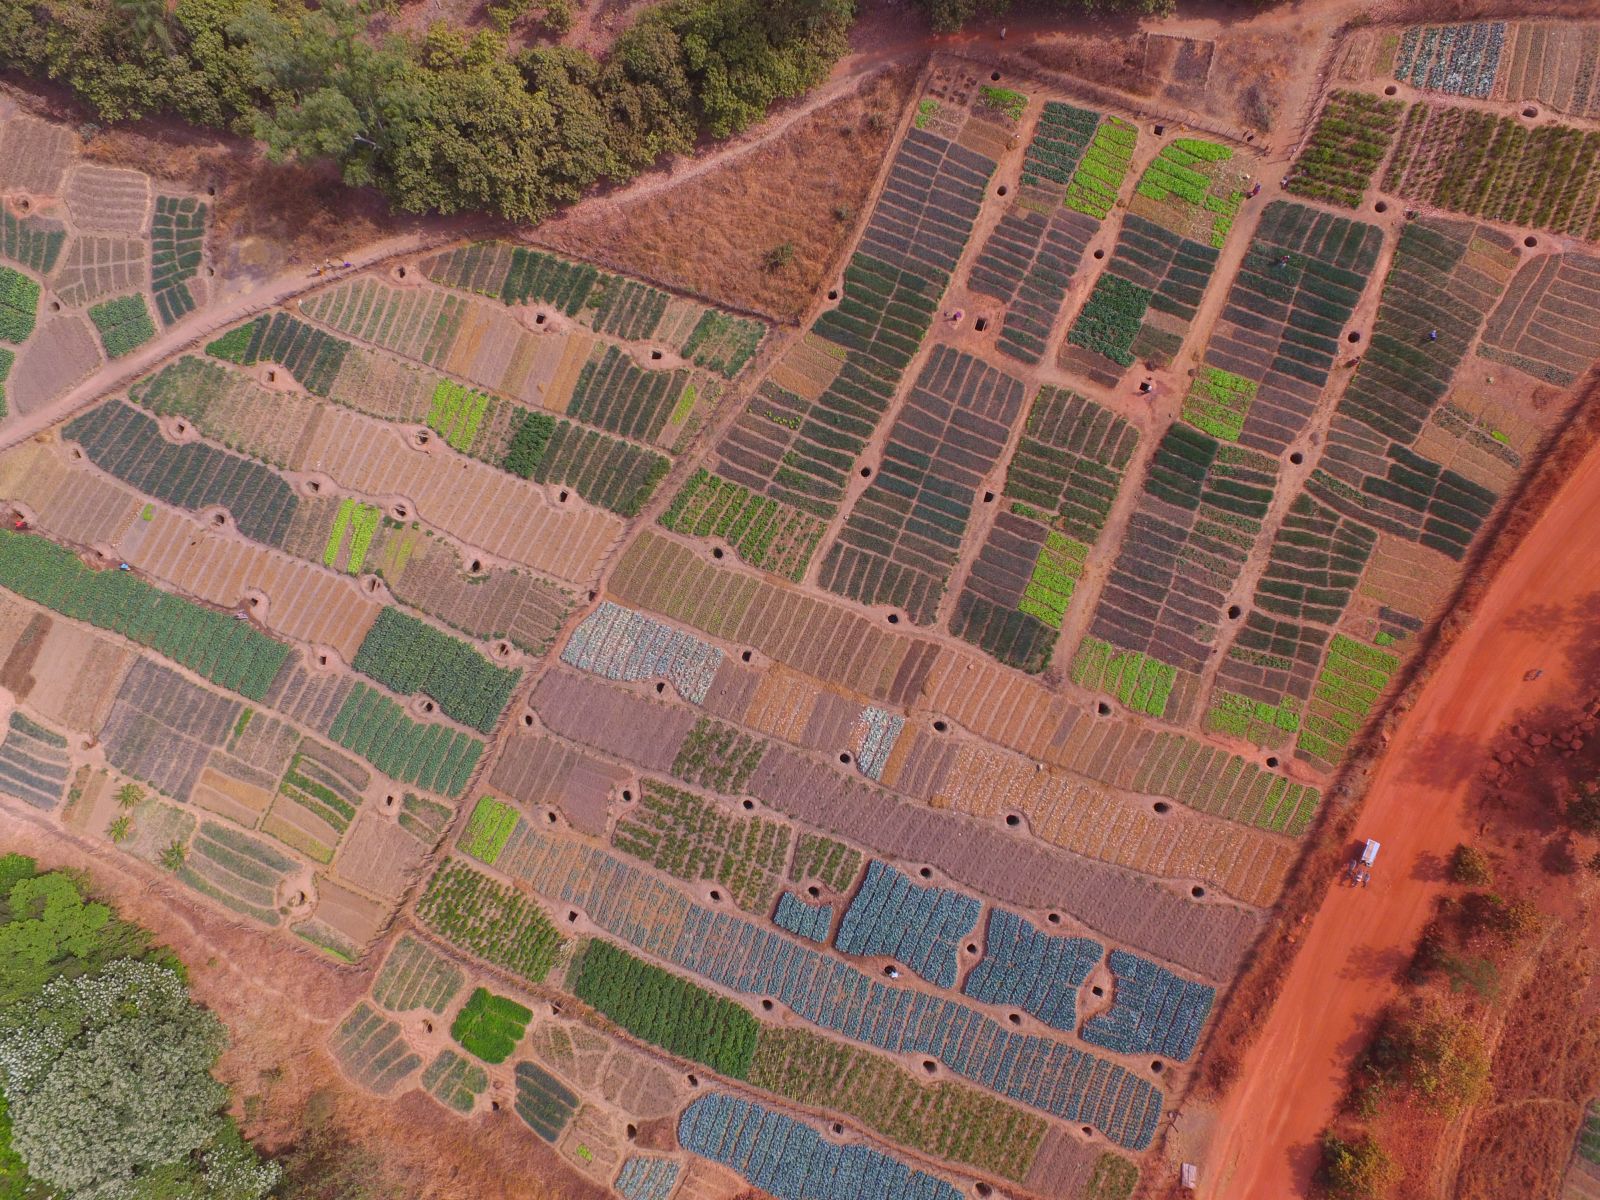 The image, taken with a surveying drone, allows KfW to evaluate an irrigation project in the Sikasso region of Mali. The colours indicate the different crops: cabbage is blue, lettuce light green, onions dark green.